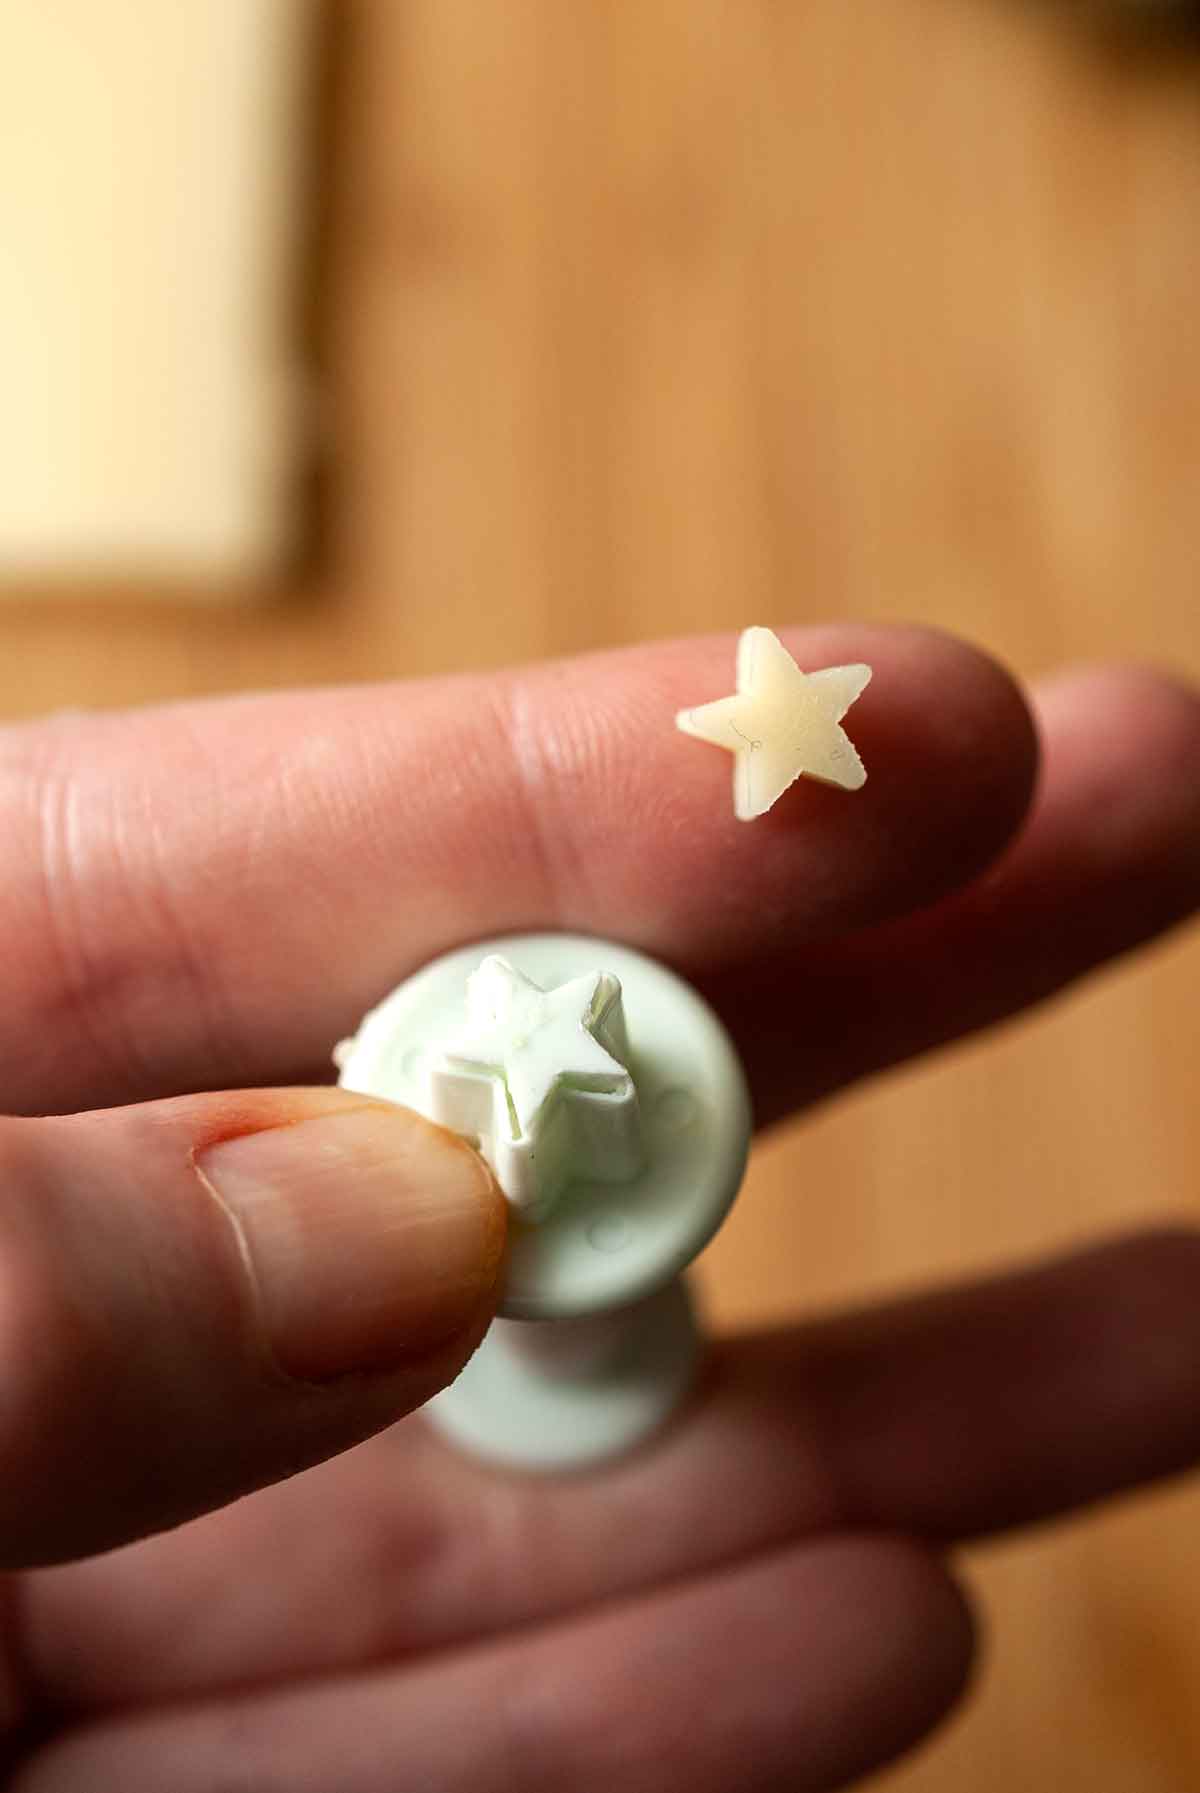 A hand holding a tiny star puncher with a small cheese star on the pointer finger.